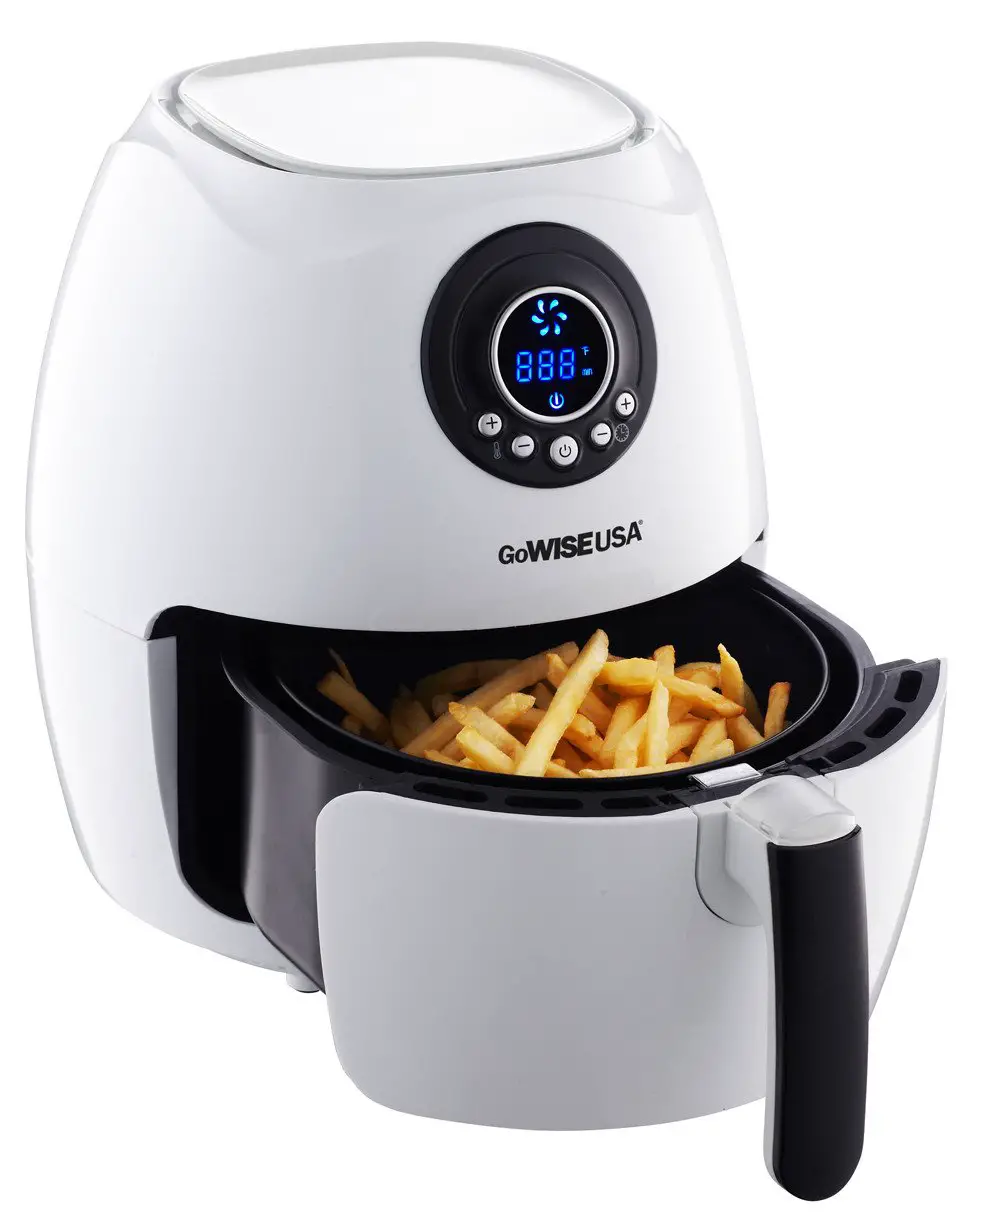 What Is The Biggest Size Air Fryer They Make